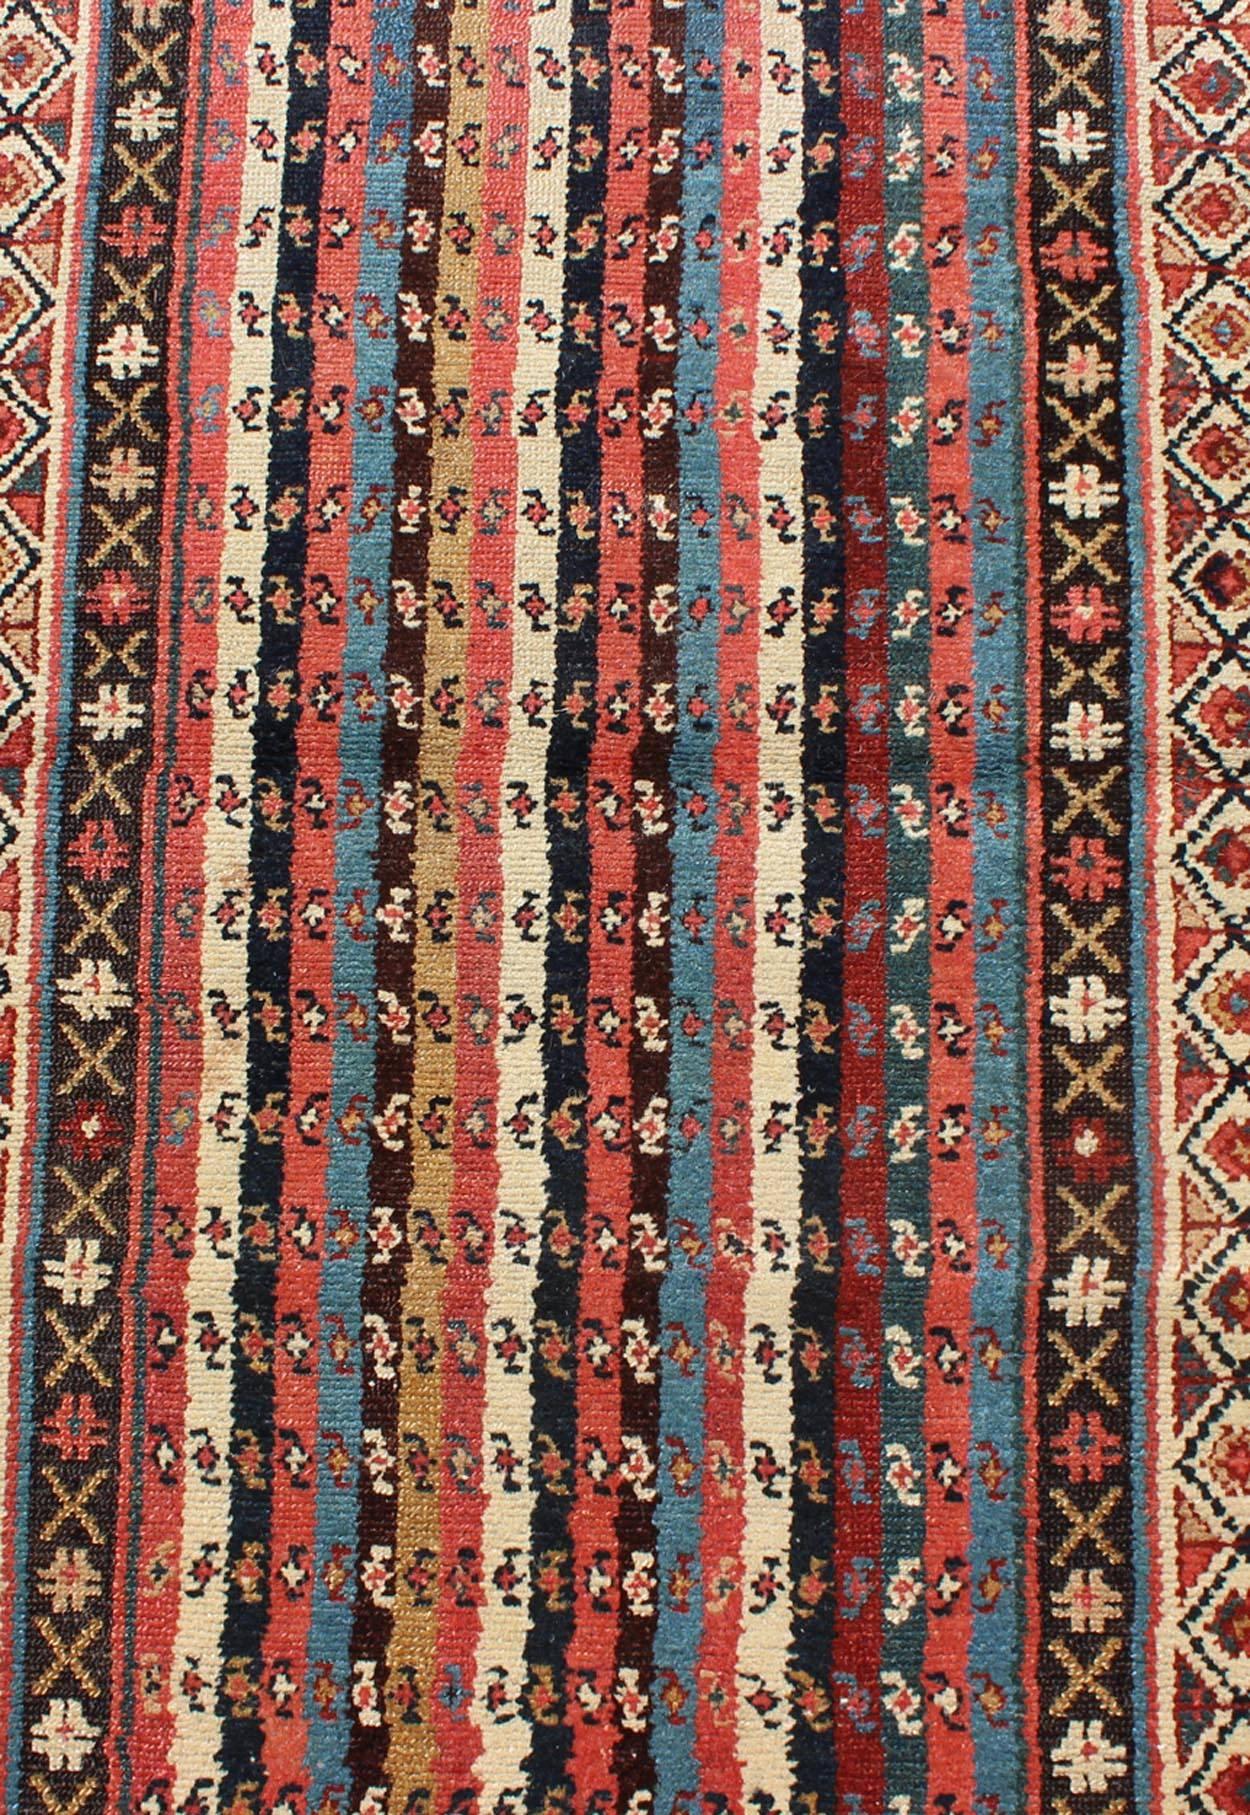 Late 19th Century Uniquely Designed Antique Persian Camel Hair Serab Runner with Vertical Stripes